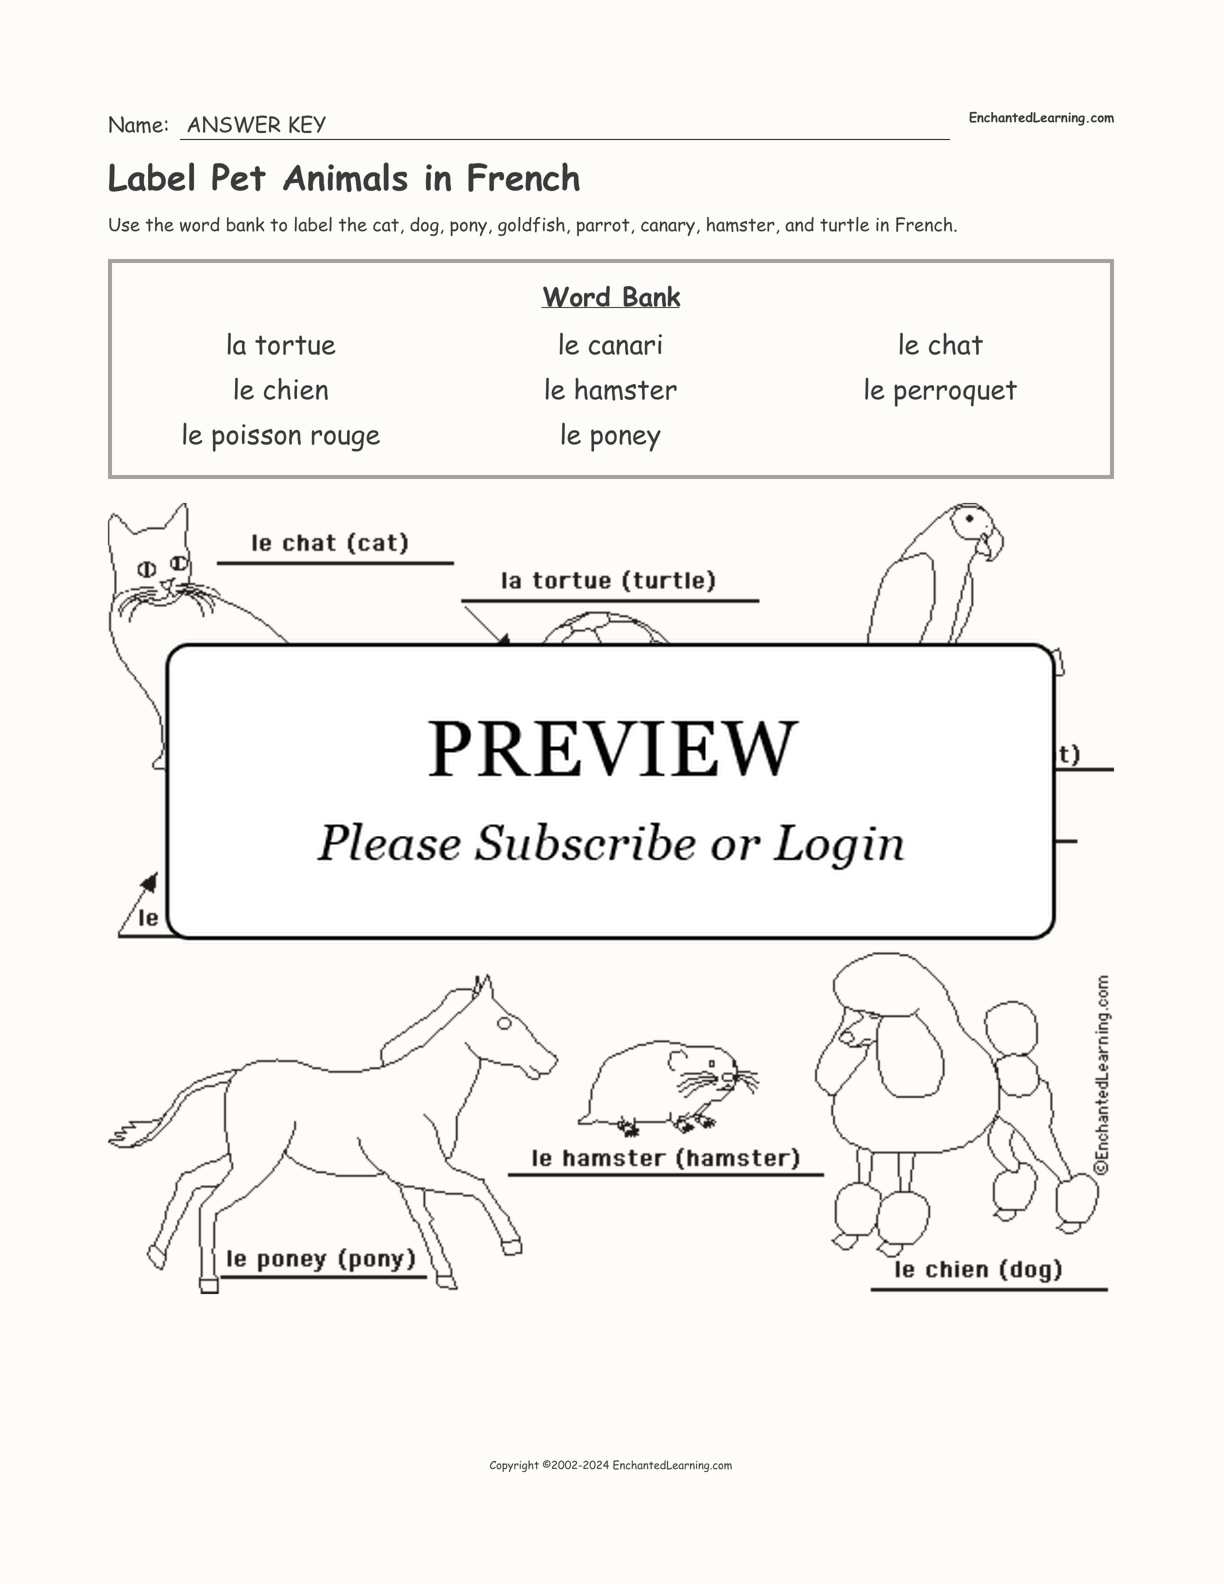 Label Pet Animals in French interactive worksheet page 2